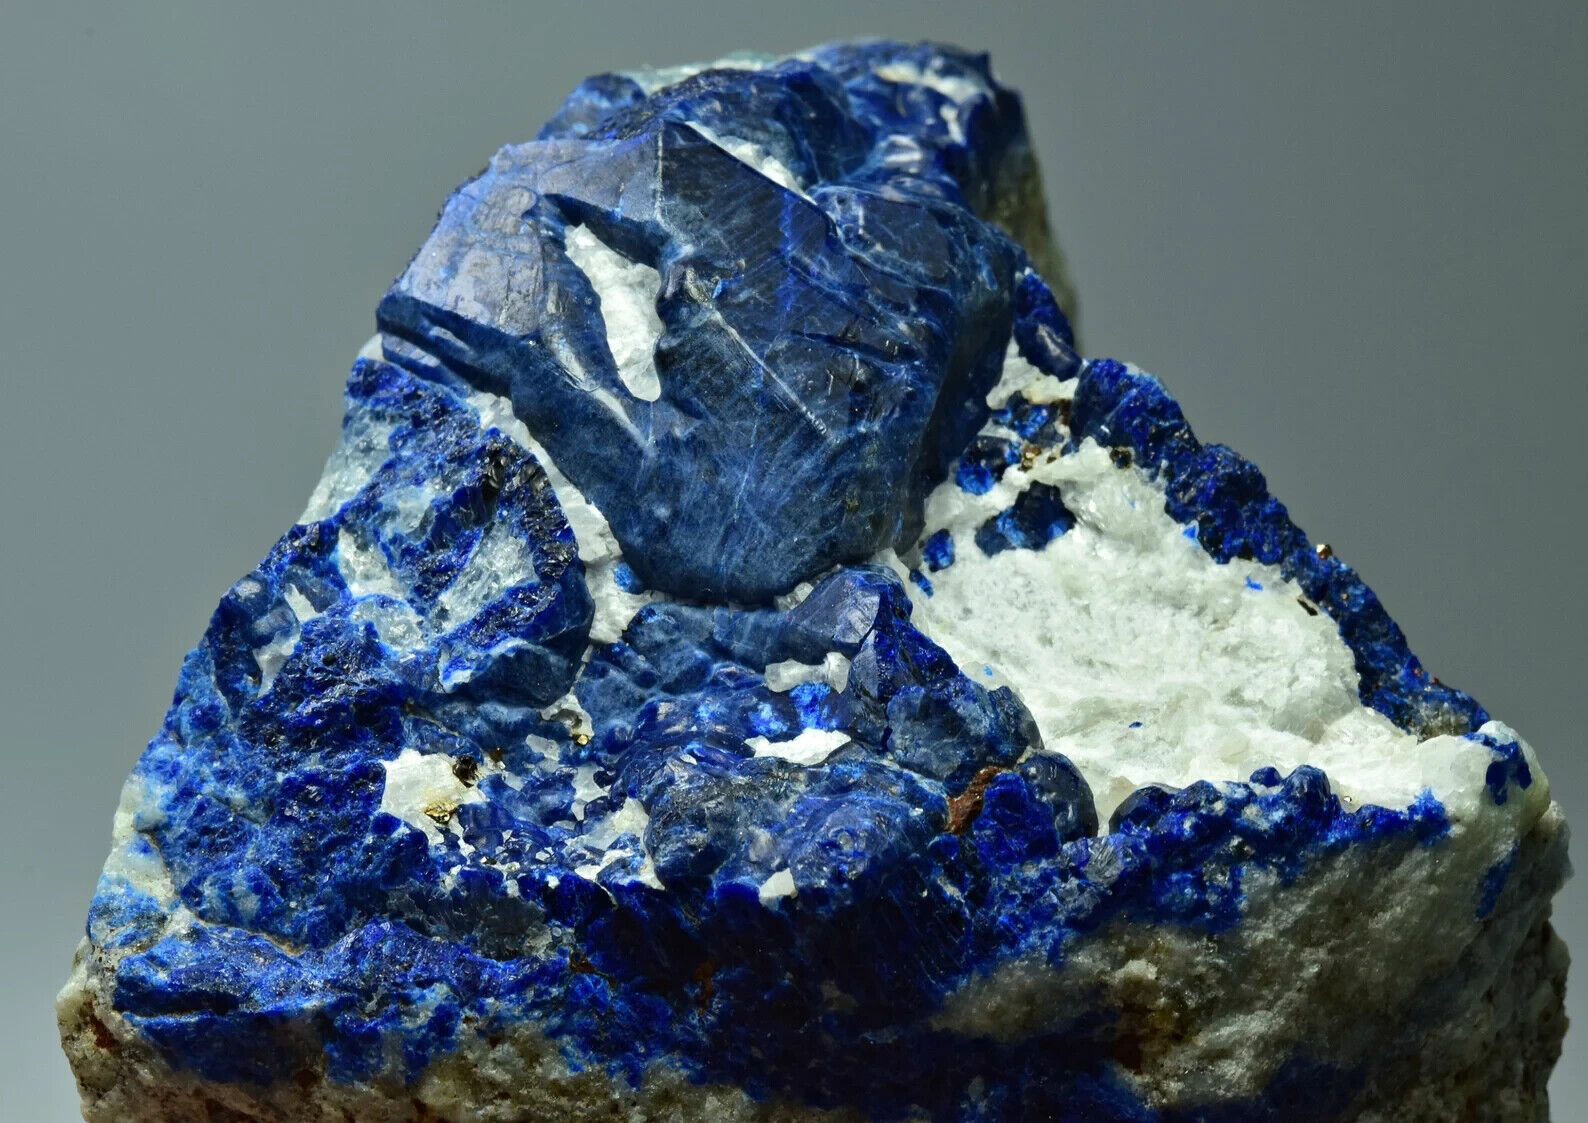 326 Gram Superb Quality Unique Sodalite Crystal With Calcite Afghanite On Matrix